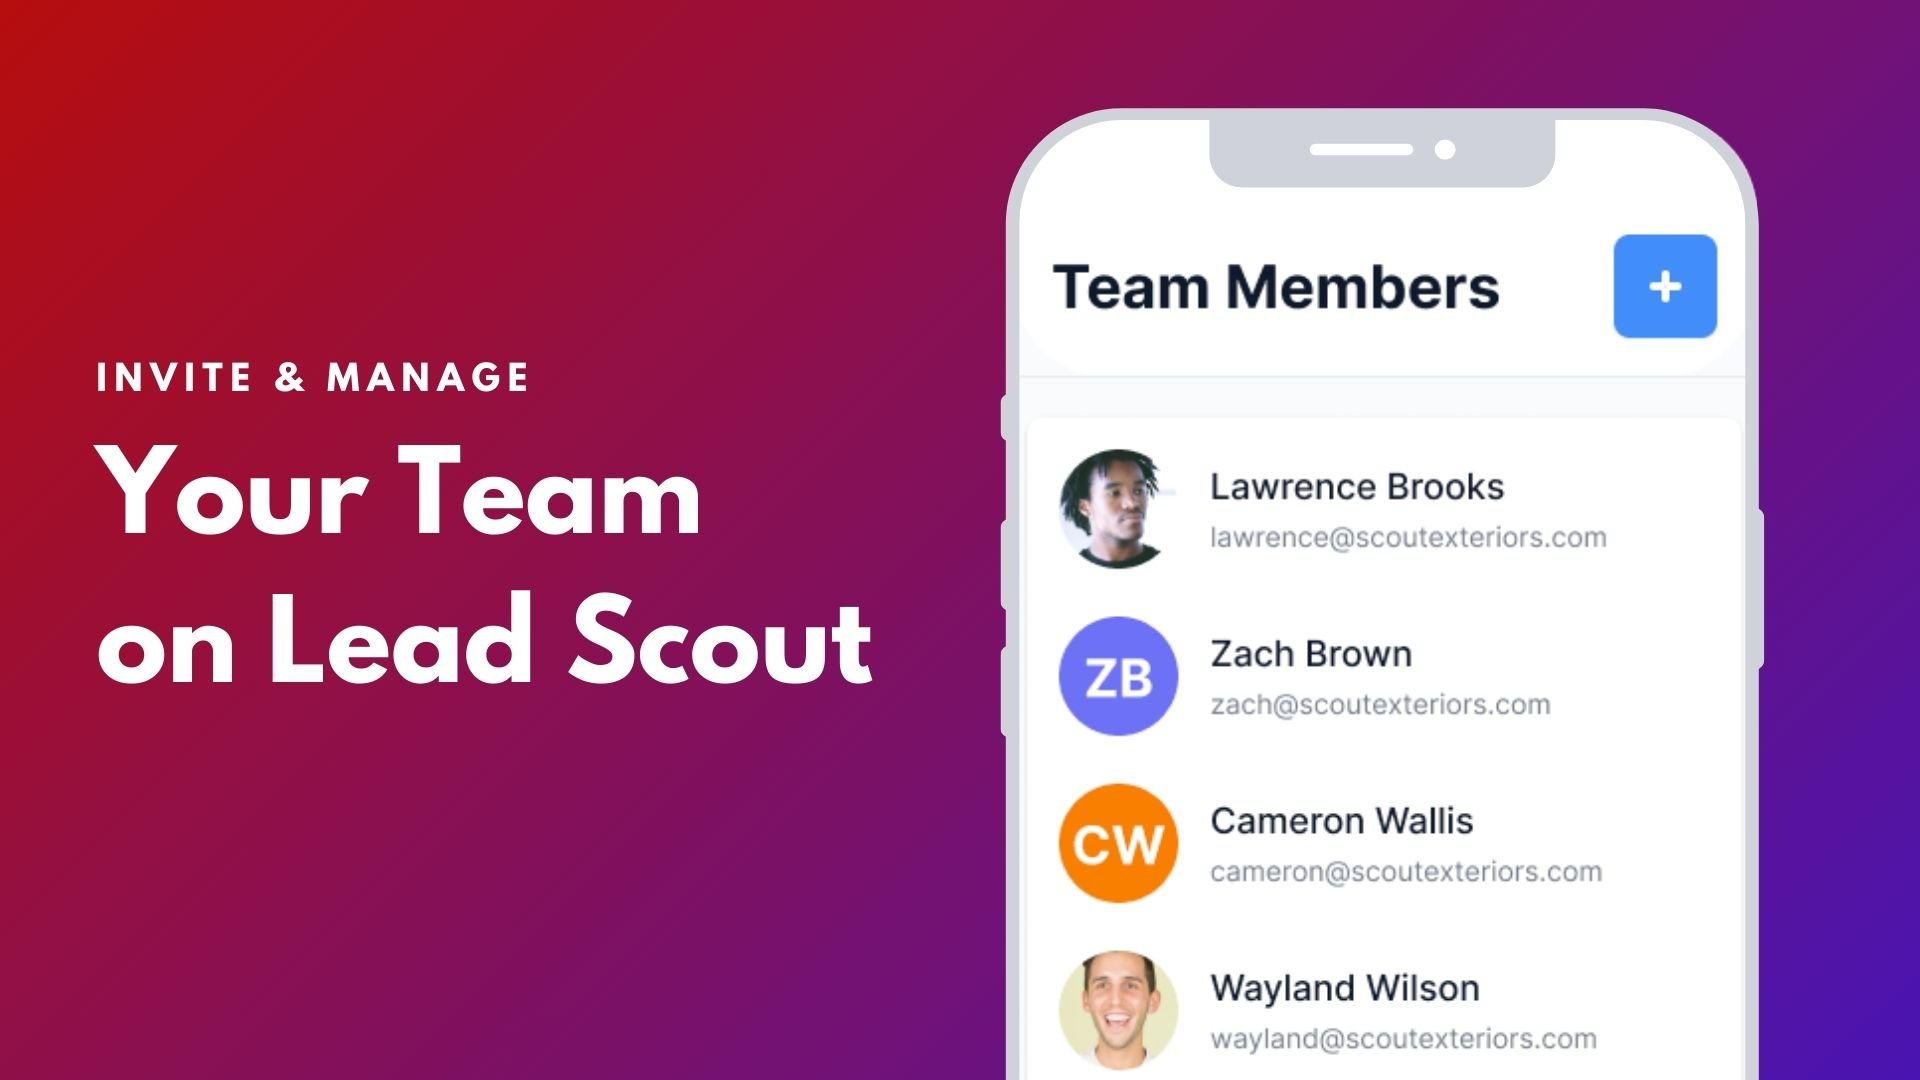 Invite & Manage your team on Lead Scout